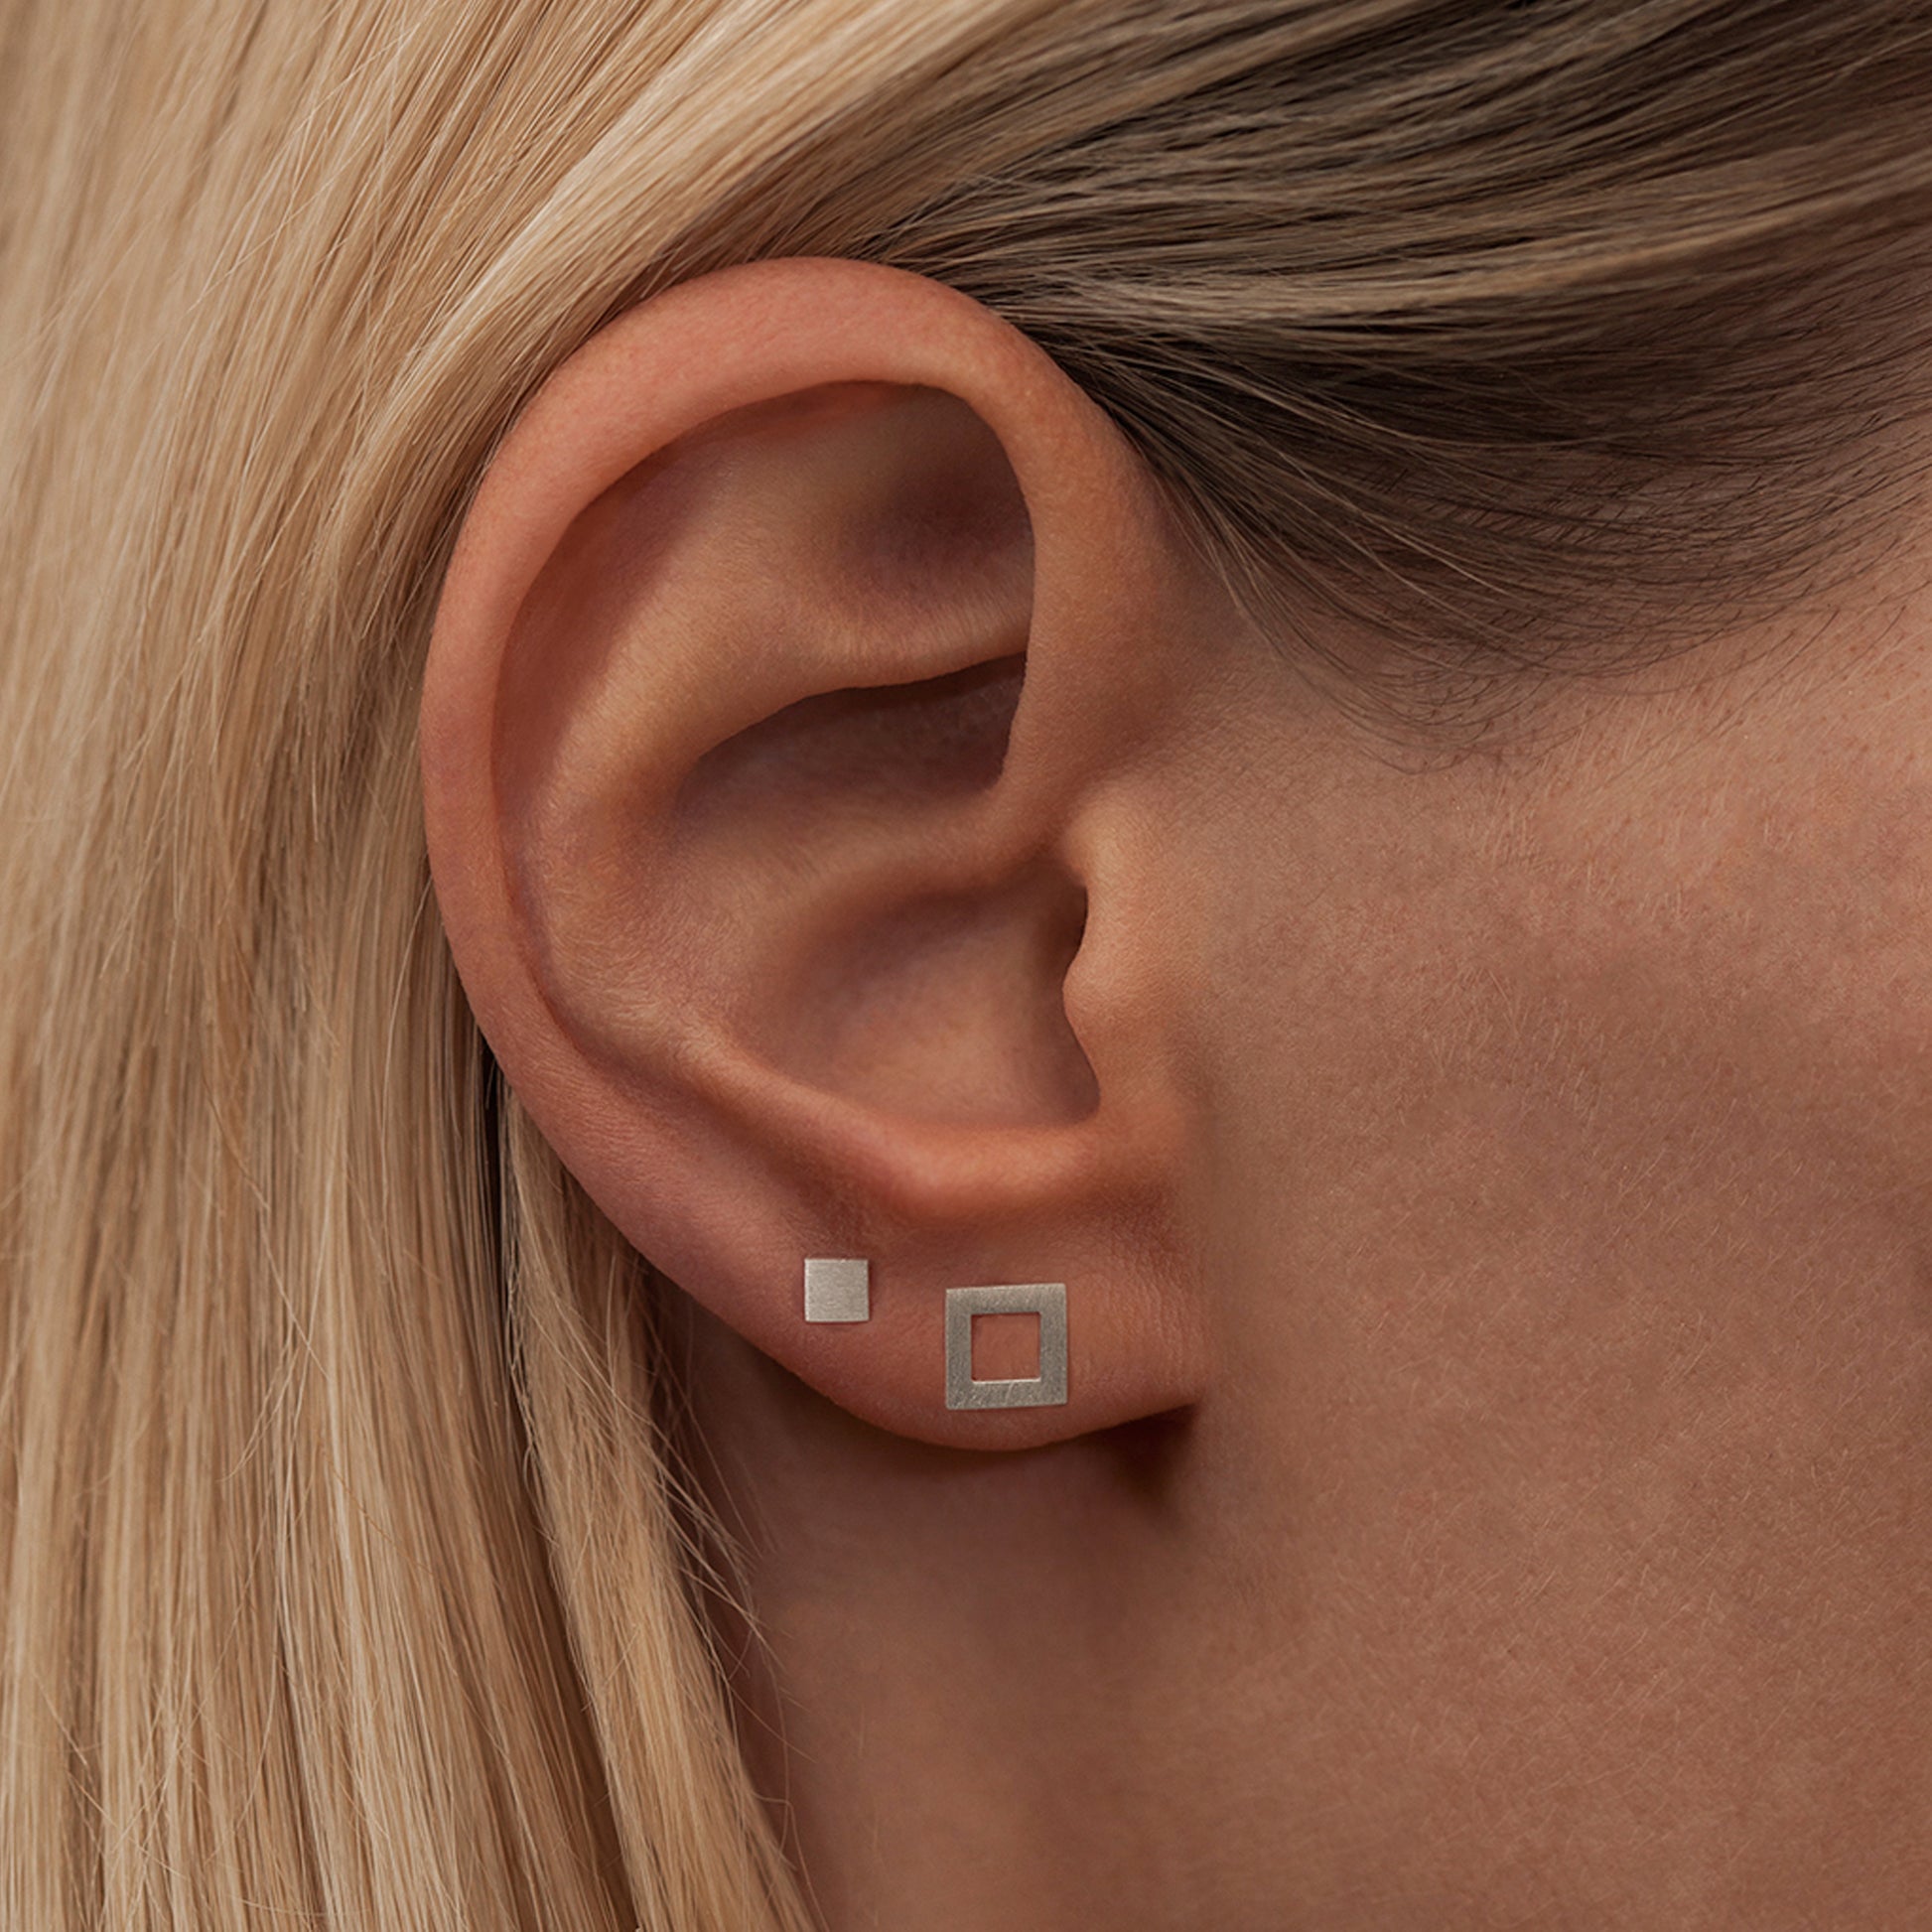 A woman's ear adorned with a Lulu Copenhagen silver square stud earring, featuring a brushed silver finish.